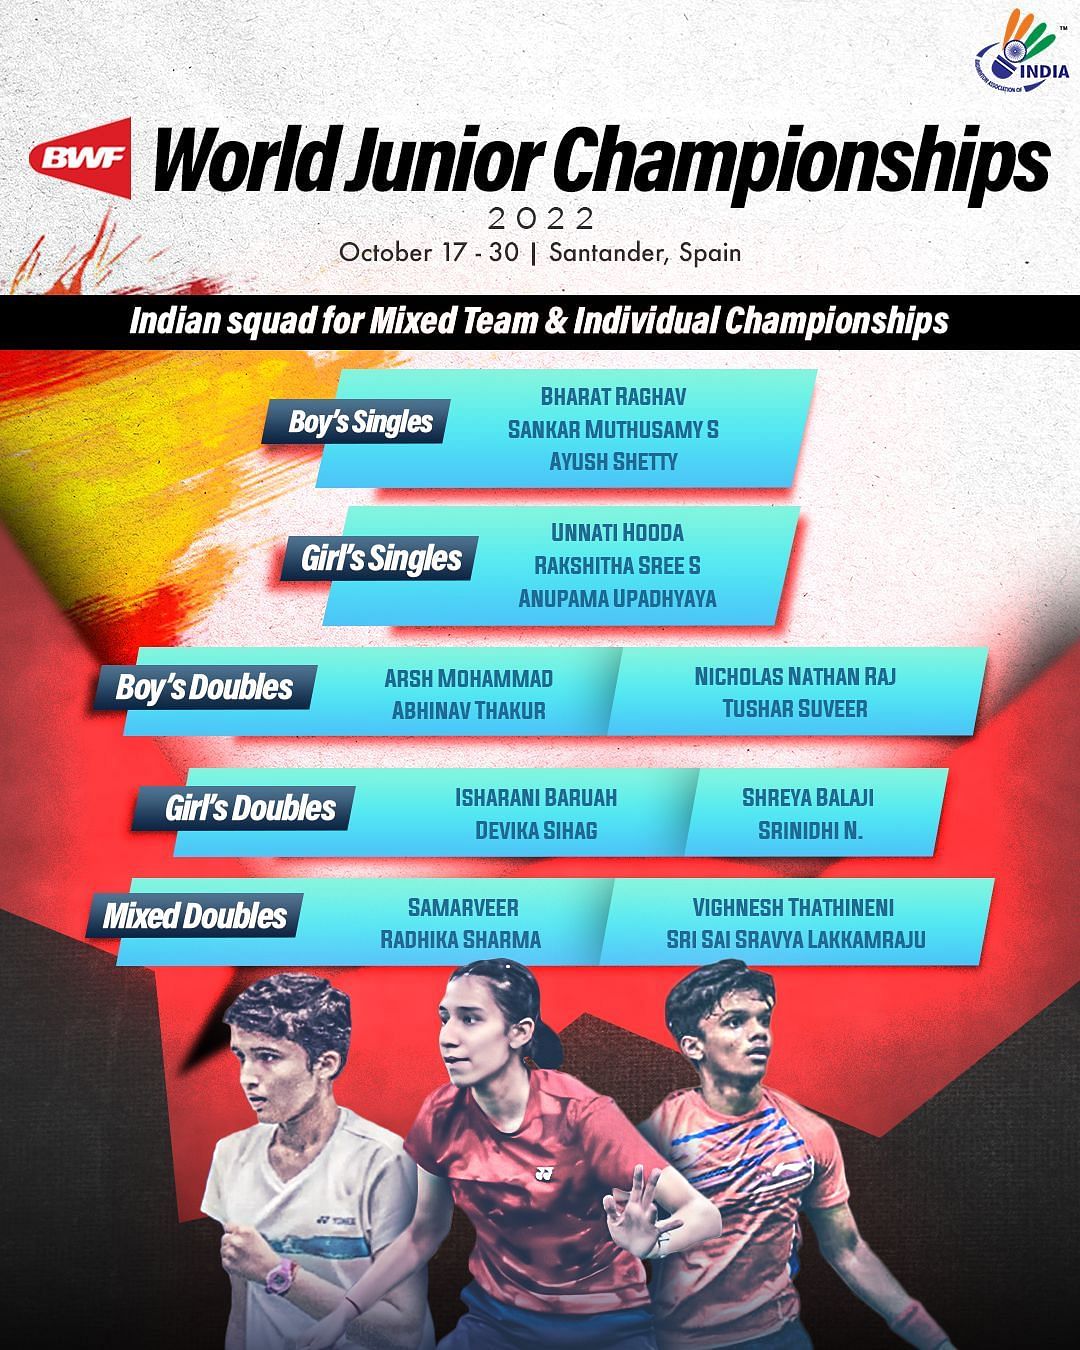 The Indina team for the World Junior Championships.